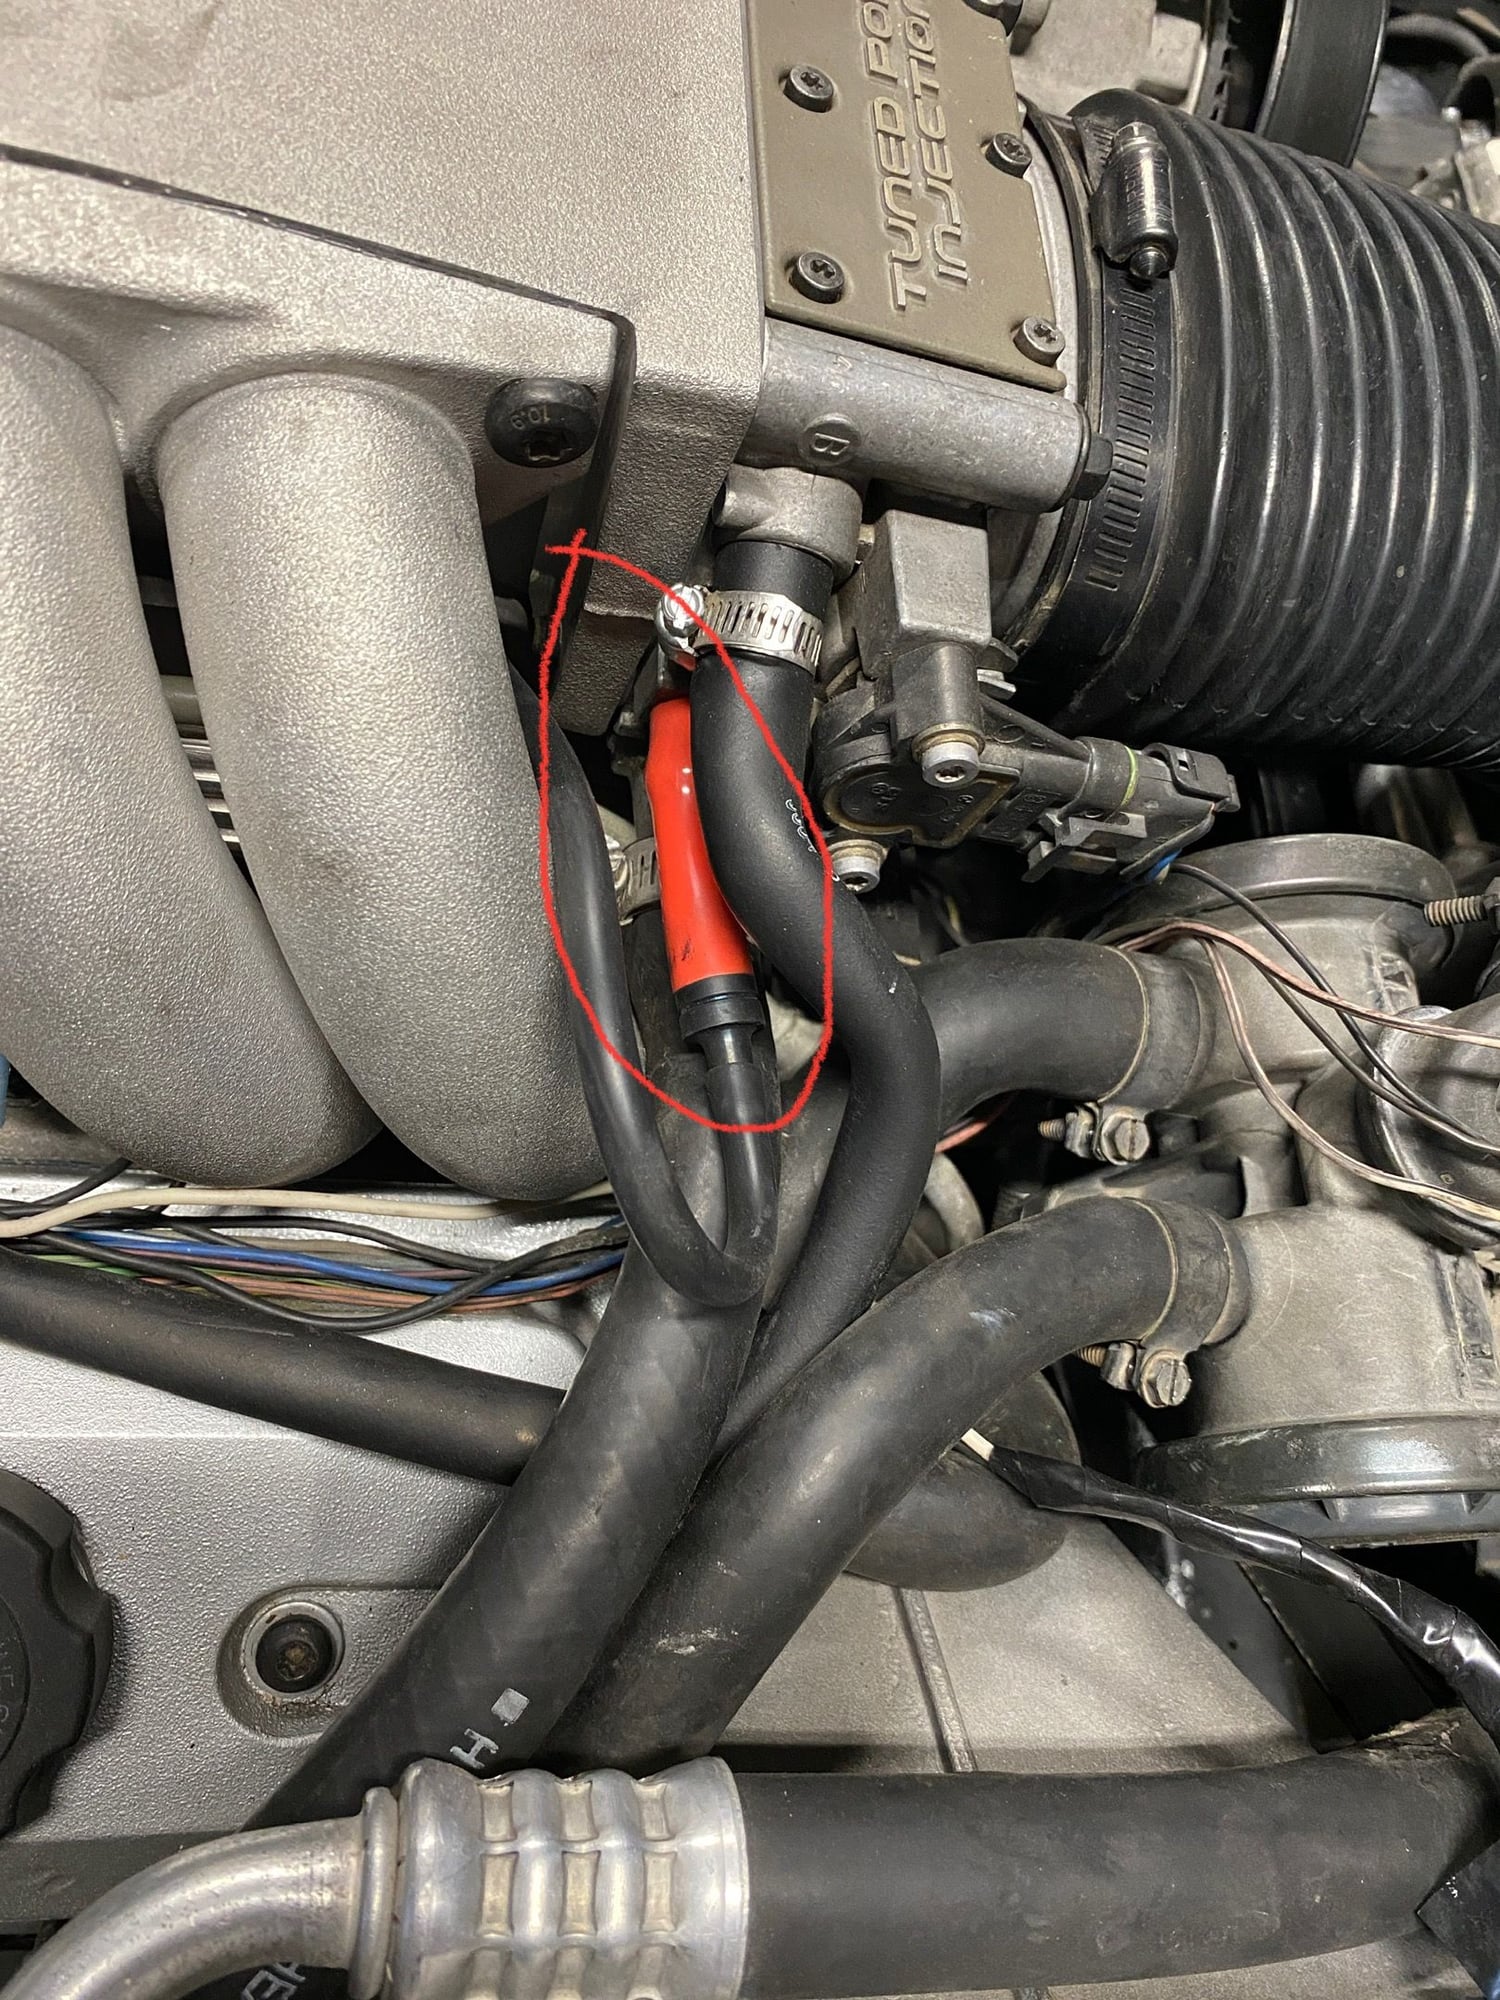 Vacuum Hose connects from throttle to?